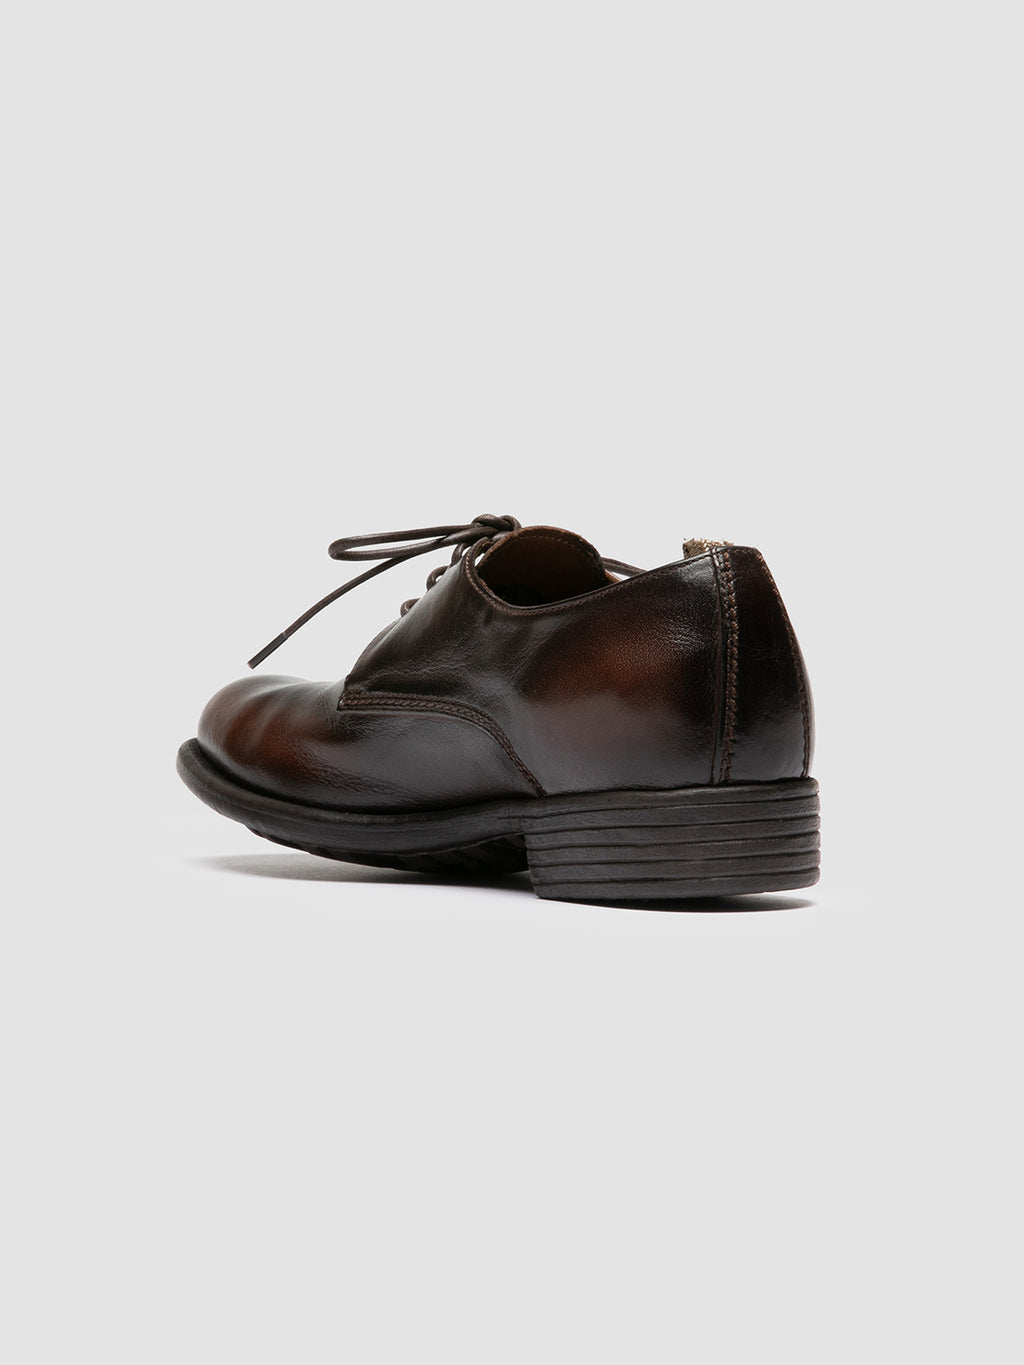 CALIXTE 068 - Brown Leather Derby Shoes